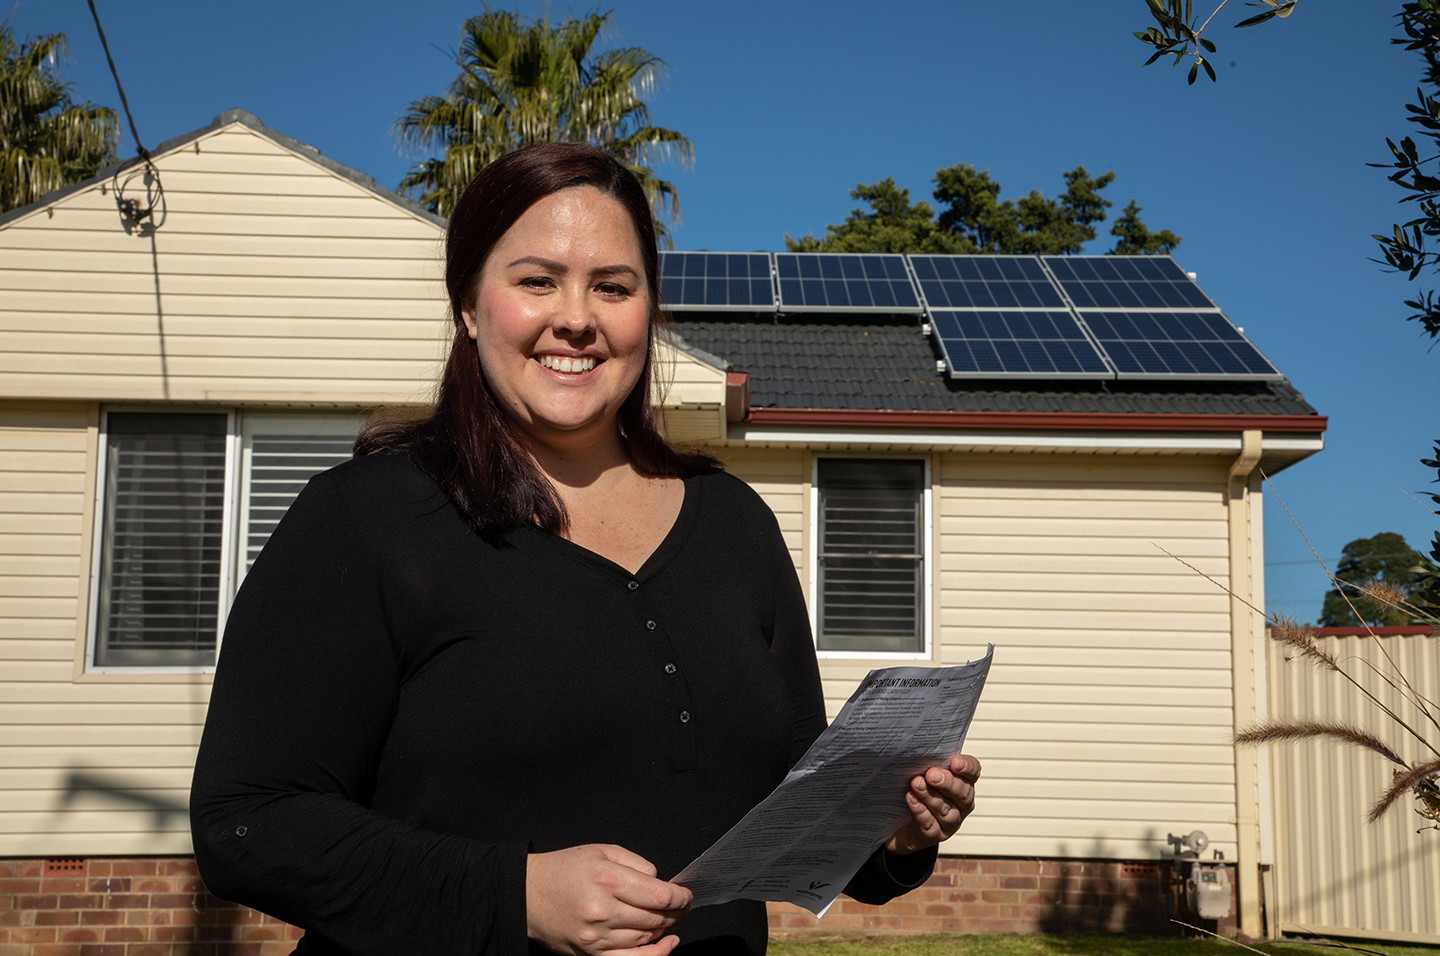 Solar program participant standing outside house with solar panels